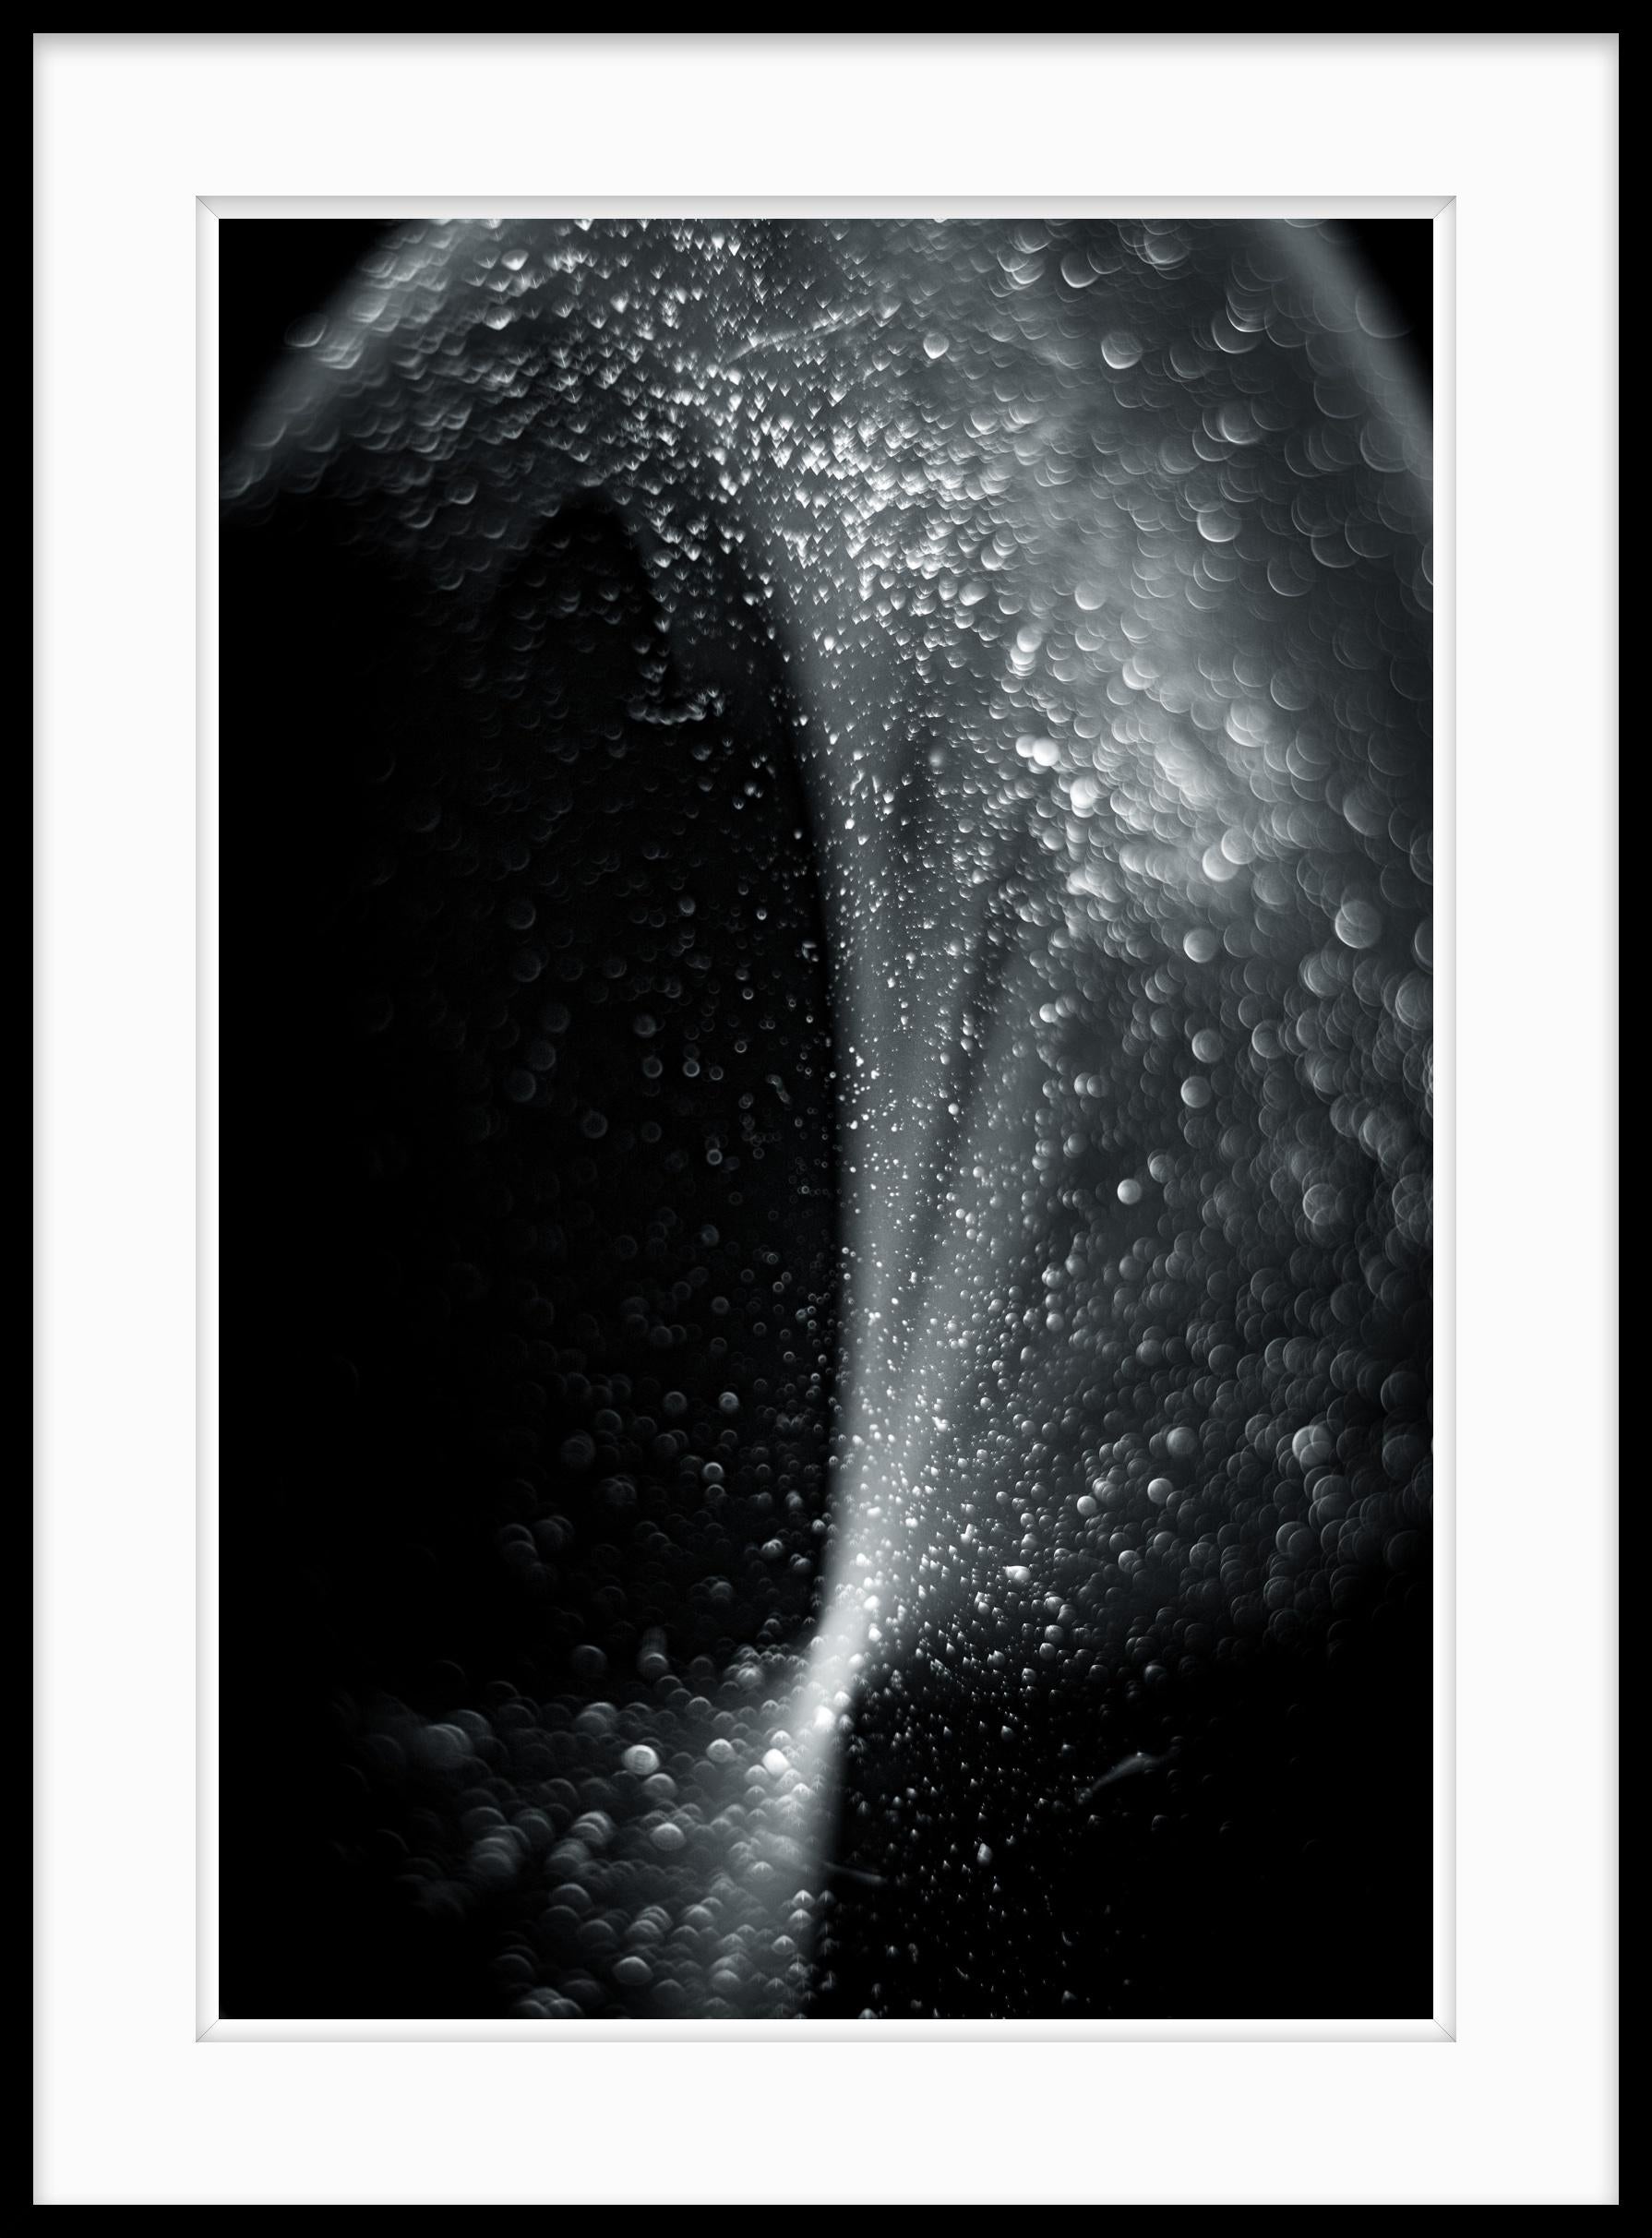 This is Untitled #40 from the Nature of Particles series.

The Nature of Particles series consists of abstract photographs of ordinary particulates, that we observe in our everyday surroundings as floating fragments seen in shafts of light.

My